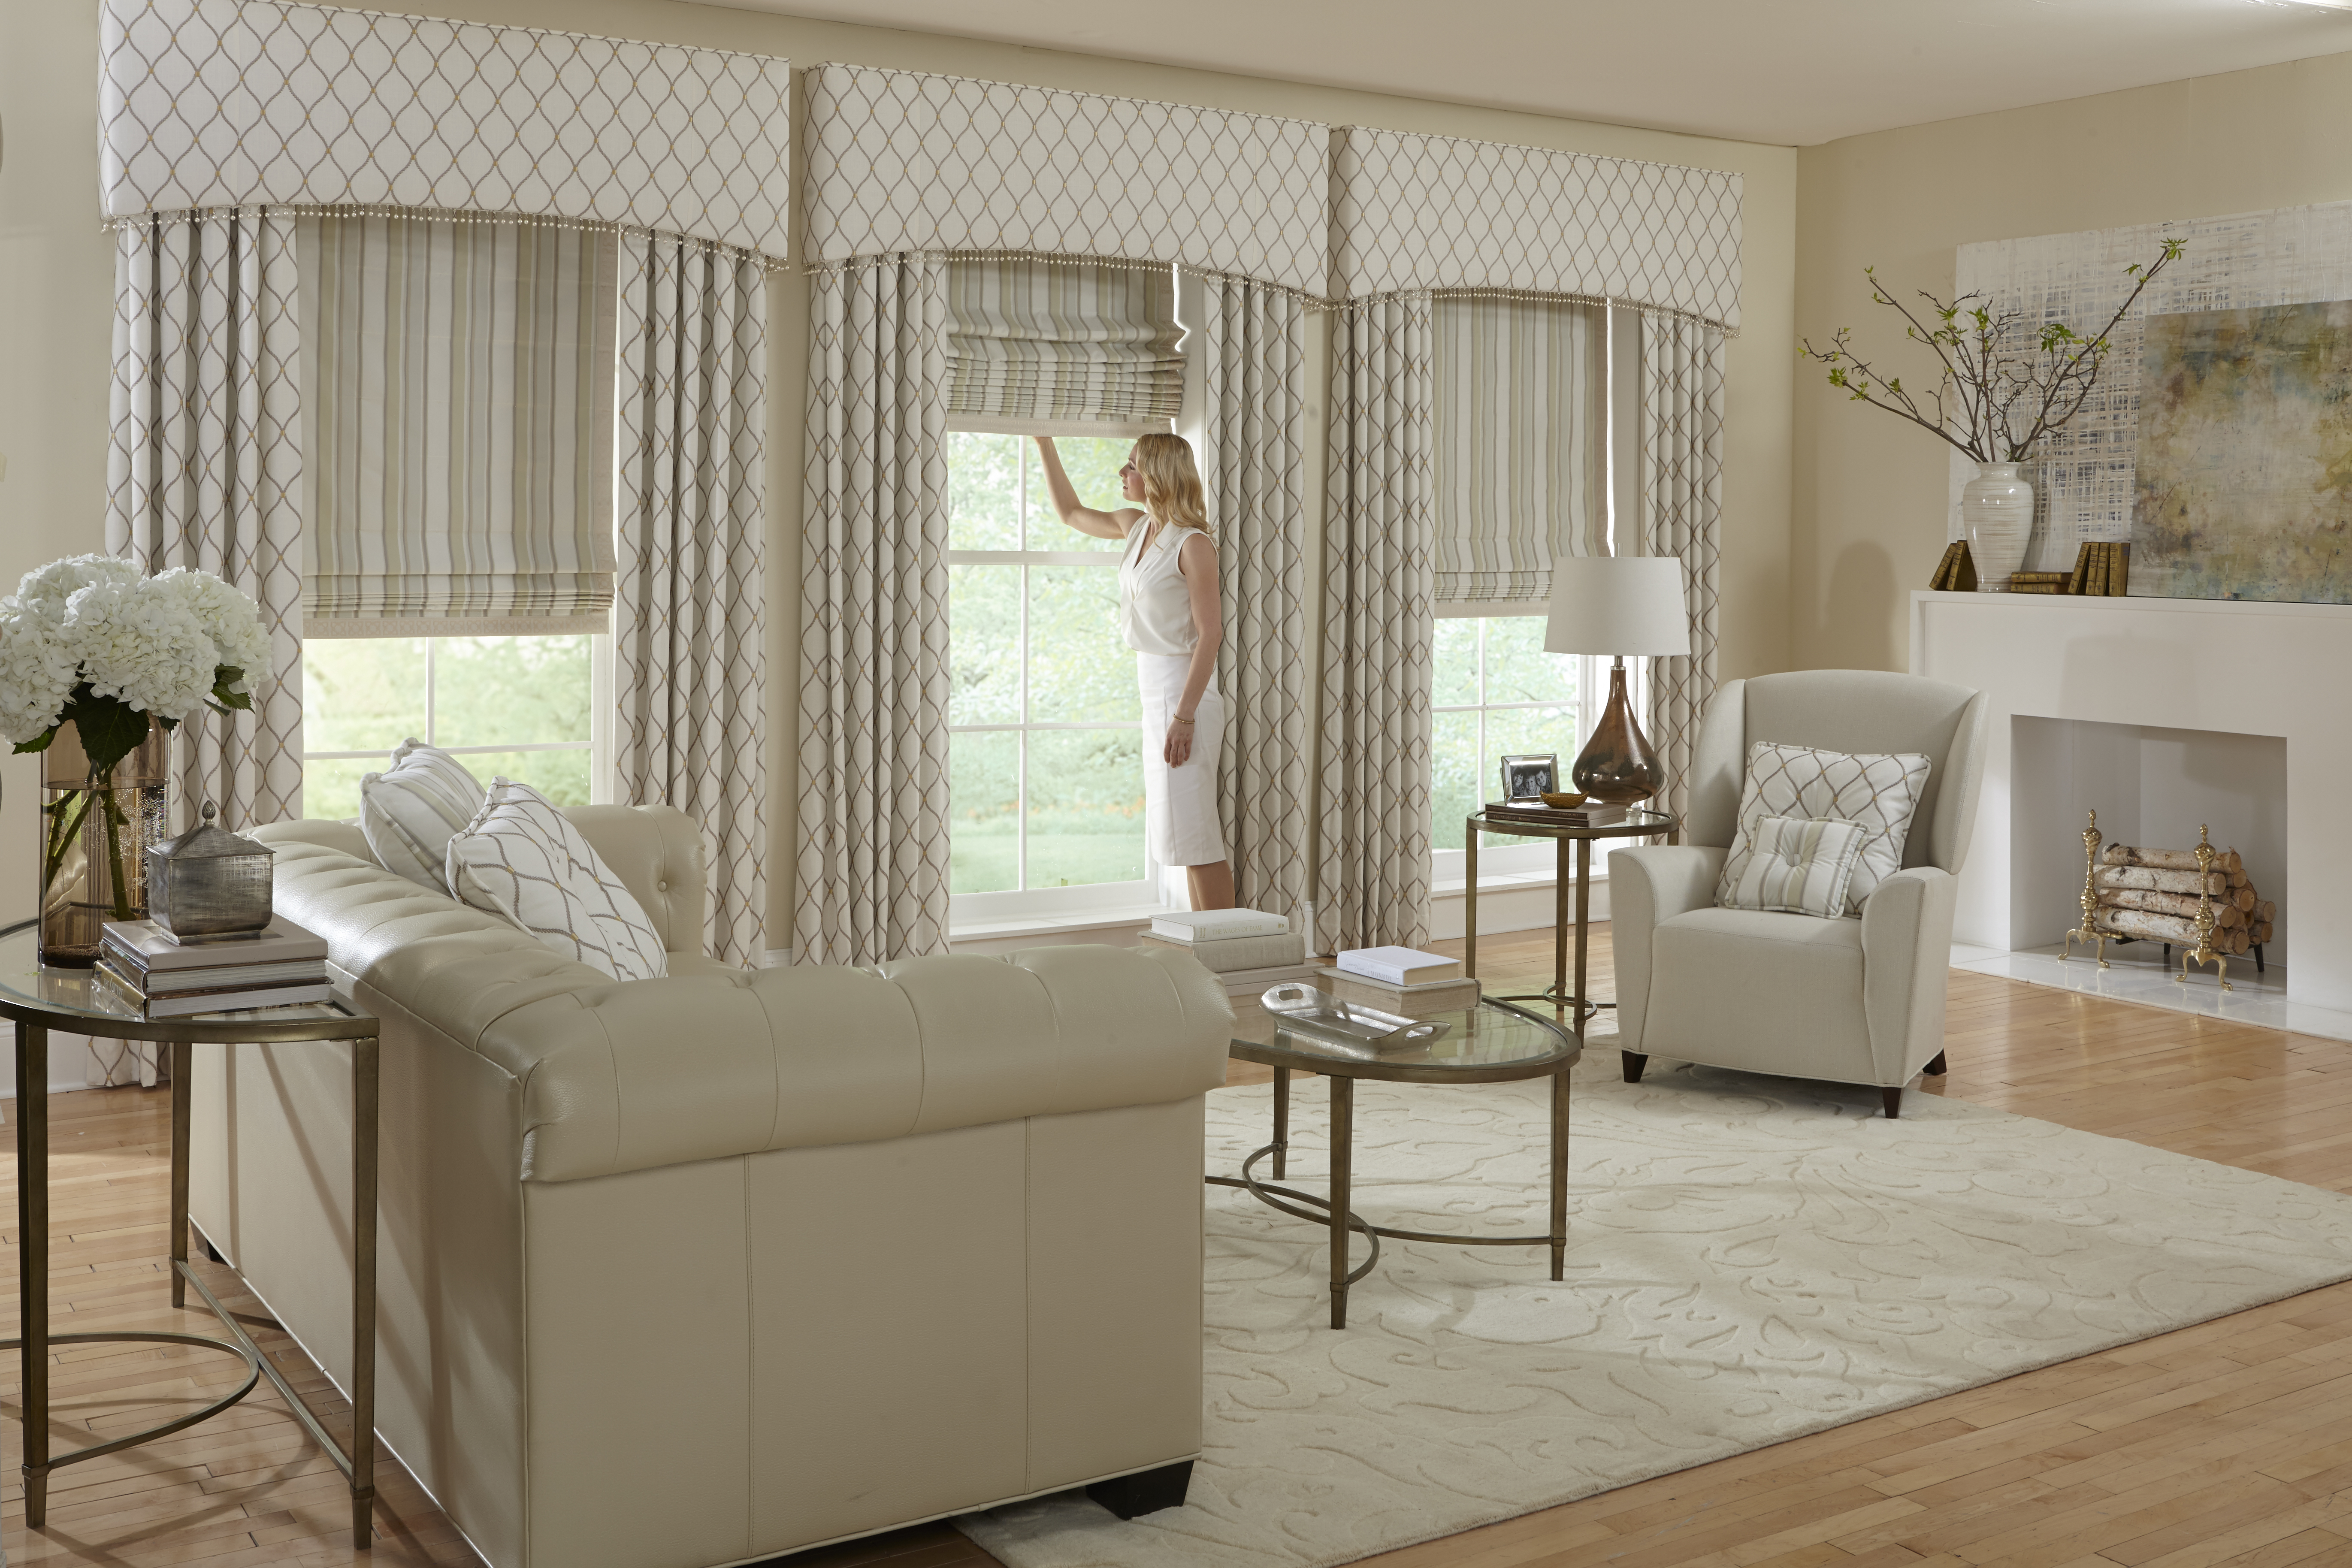 window treatments, blinds, shades, shutters, exterior shades, draperies, accent rugs, motorized blinds, 